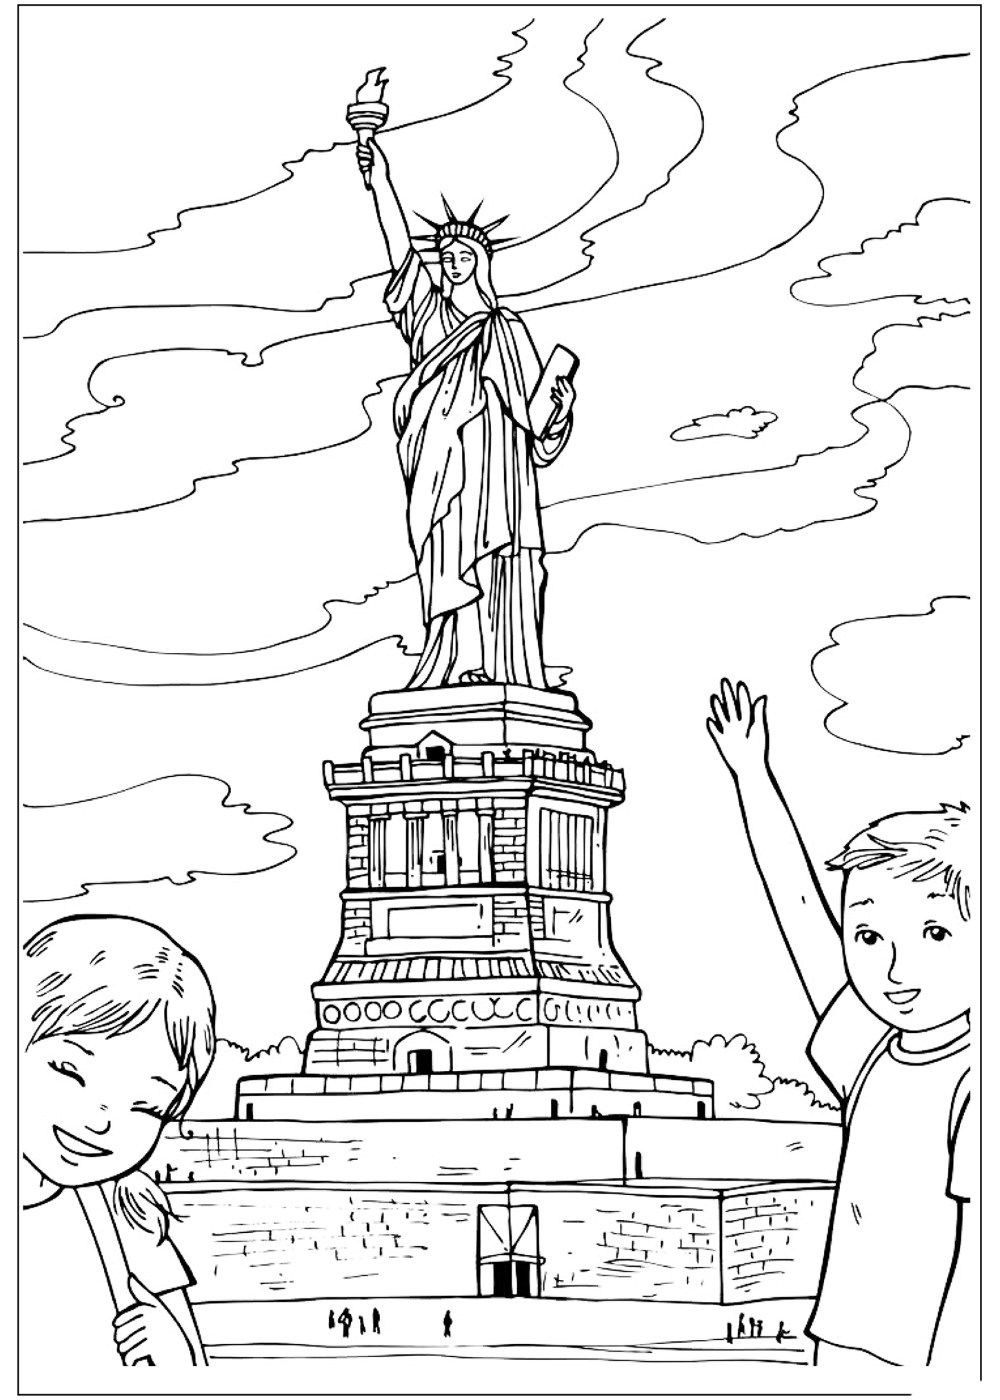 Coloring page - Statue Of Liberty